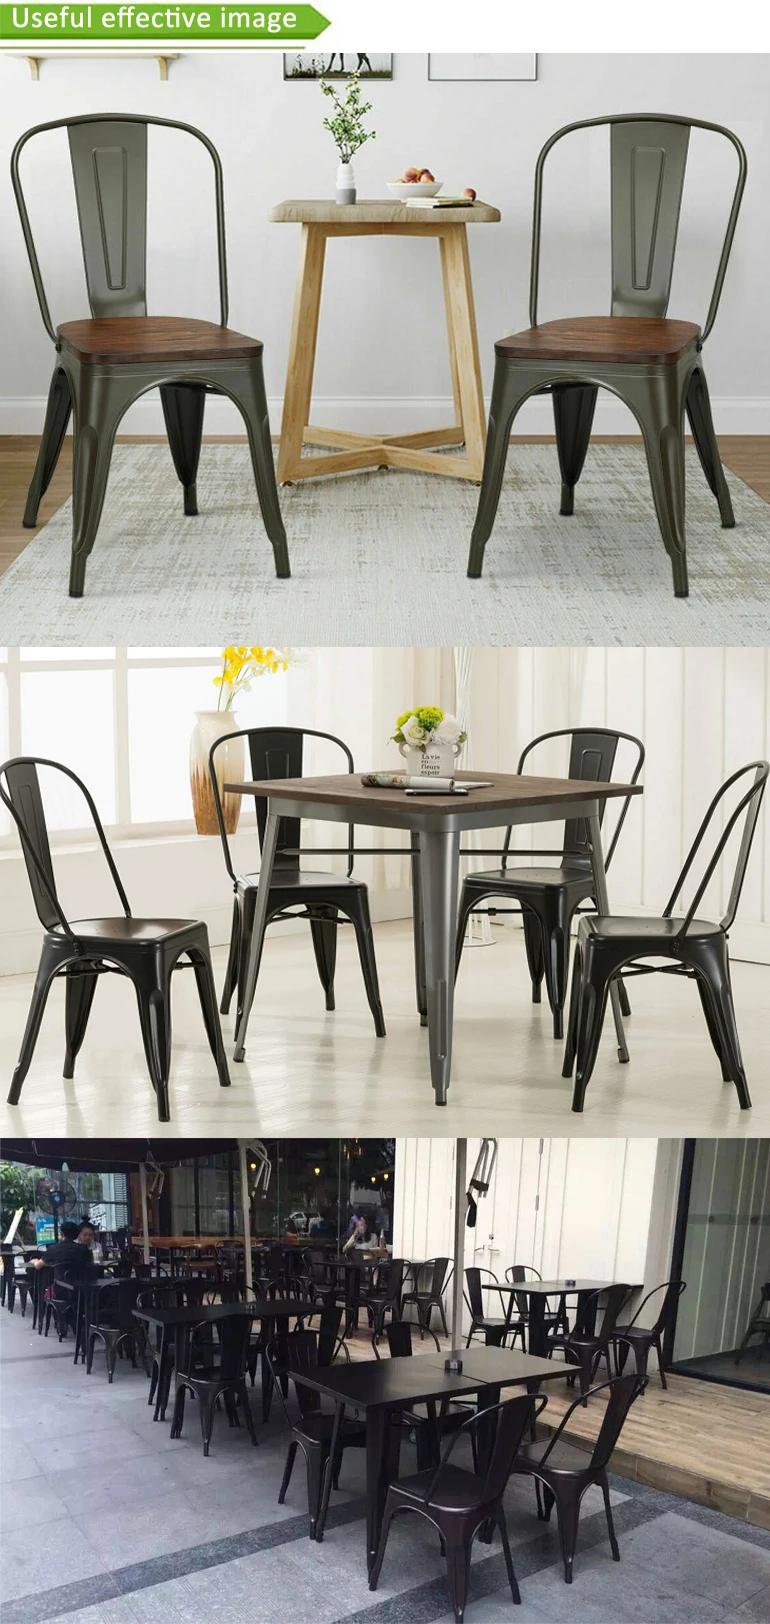 2019 Hot Sale Cheap Dining Room Furniture Restaurant Used Metal Industrial Dining Table And Chair Set